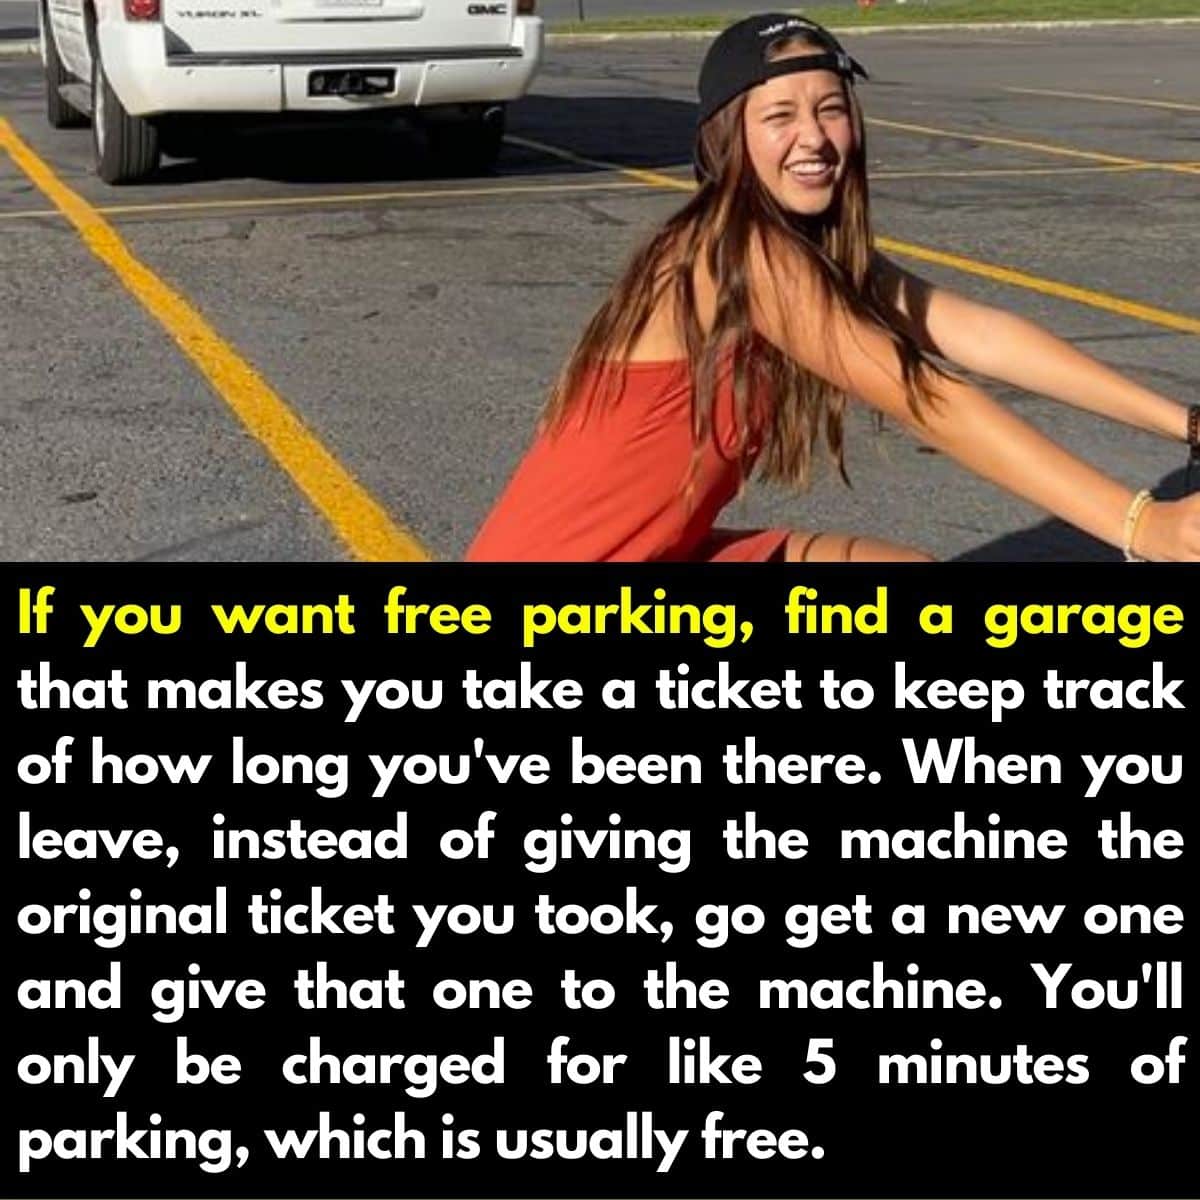 if you want free parking, find a garage that makes you take a ticket to keep track of how long you're been there, when you leave, get a new one and give that one to the machine, you'll only be charged for like 5 minutes of parking